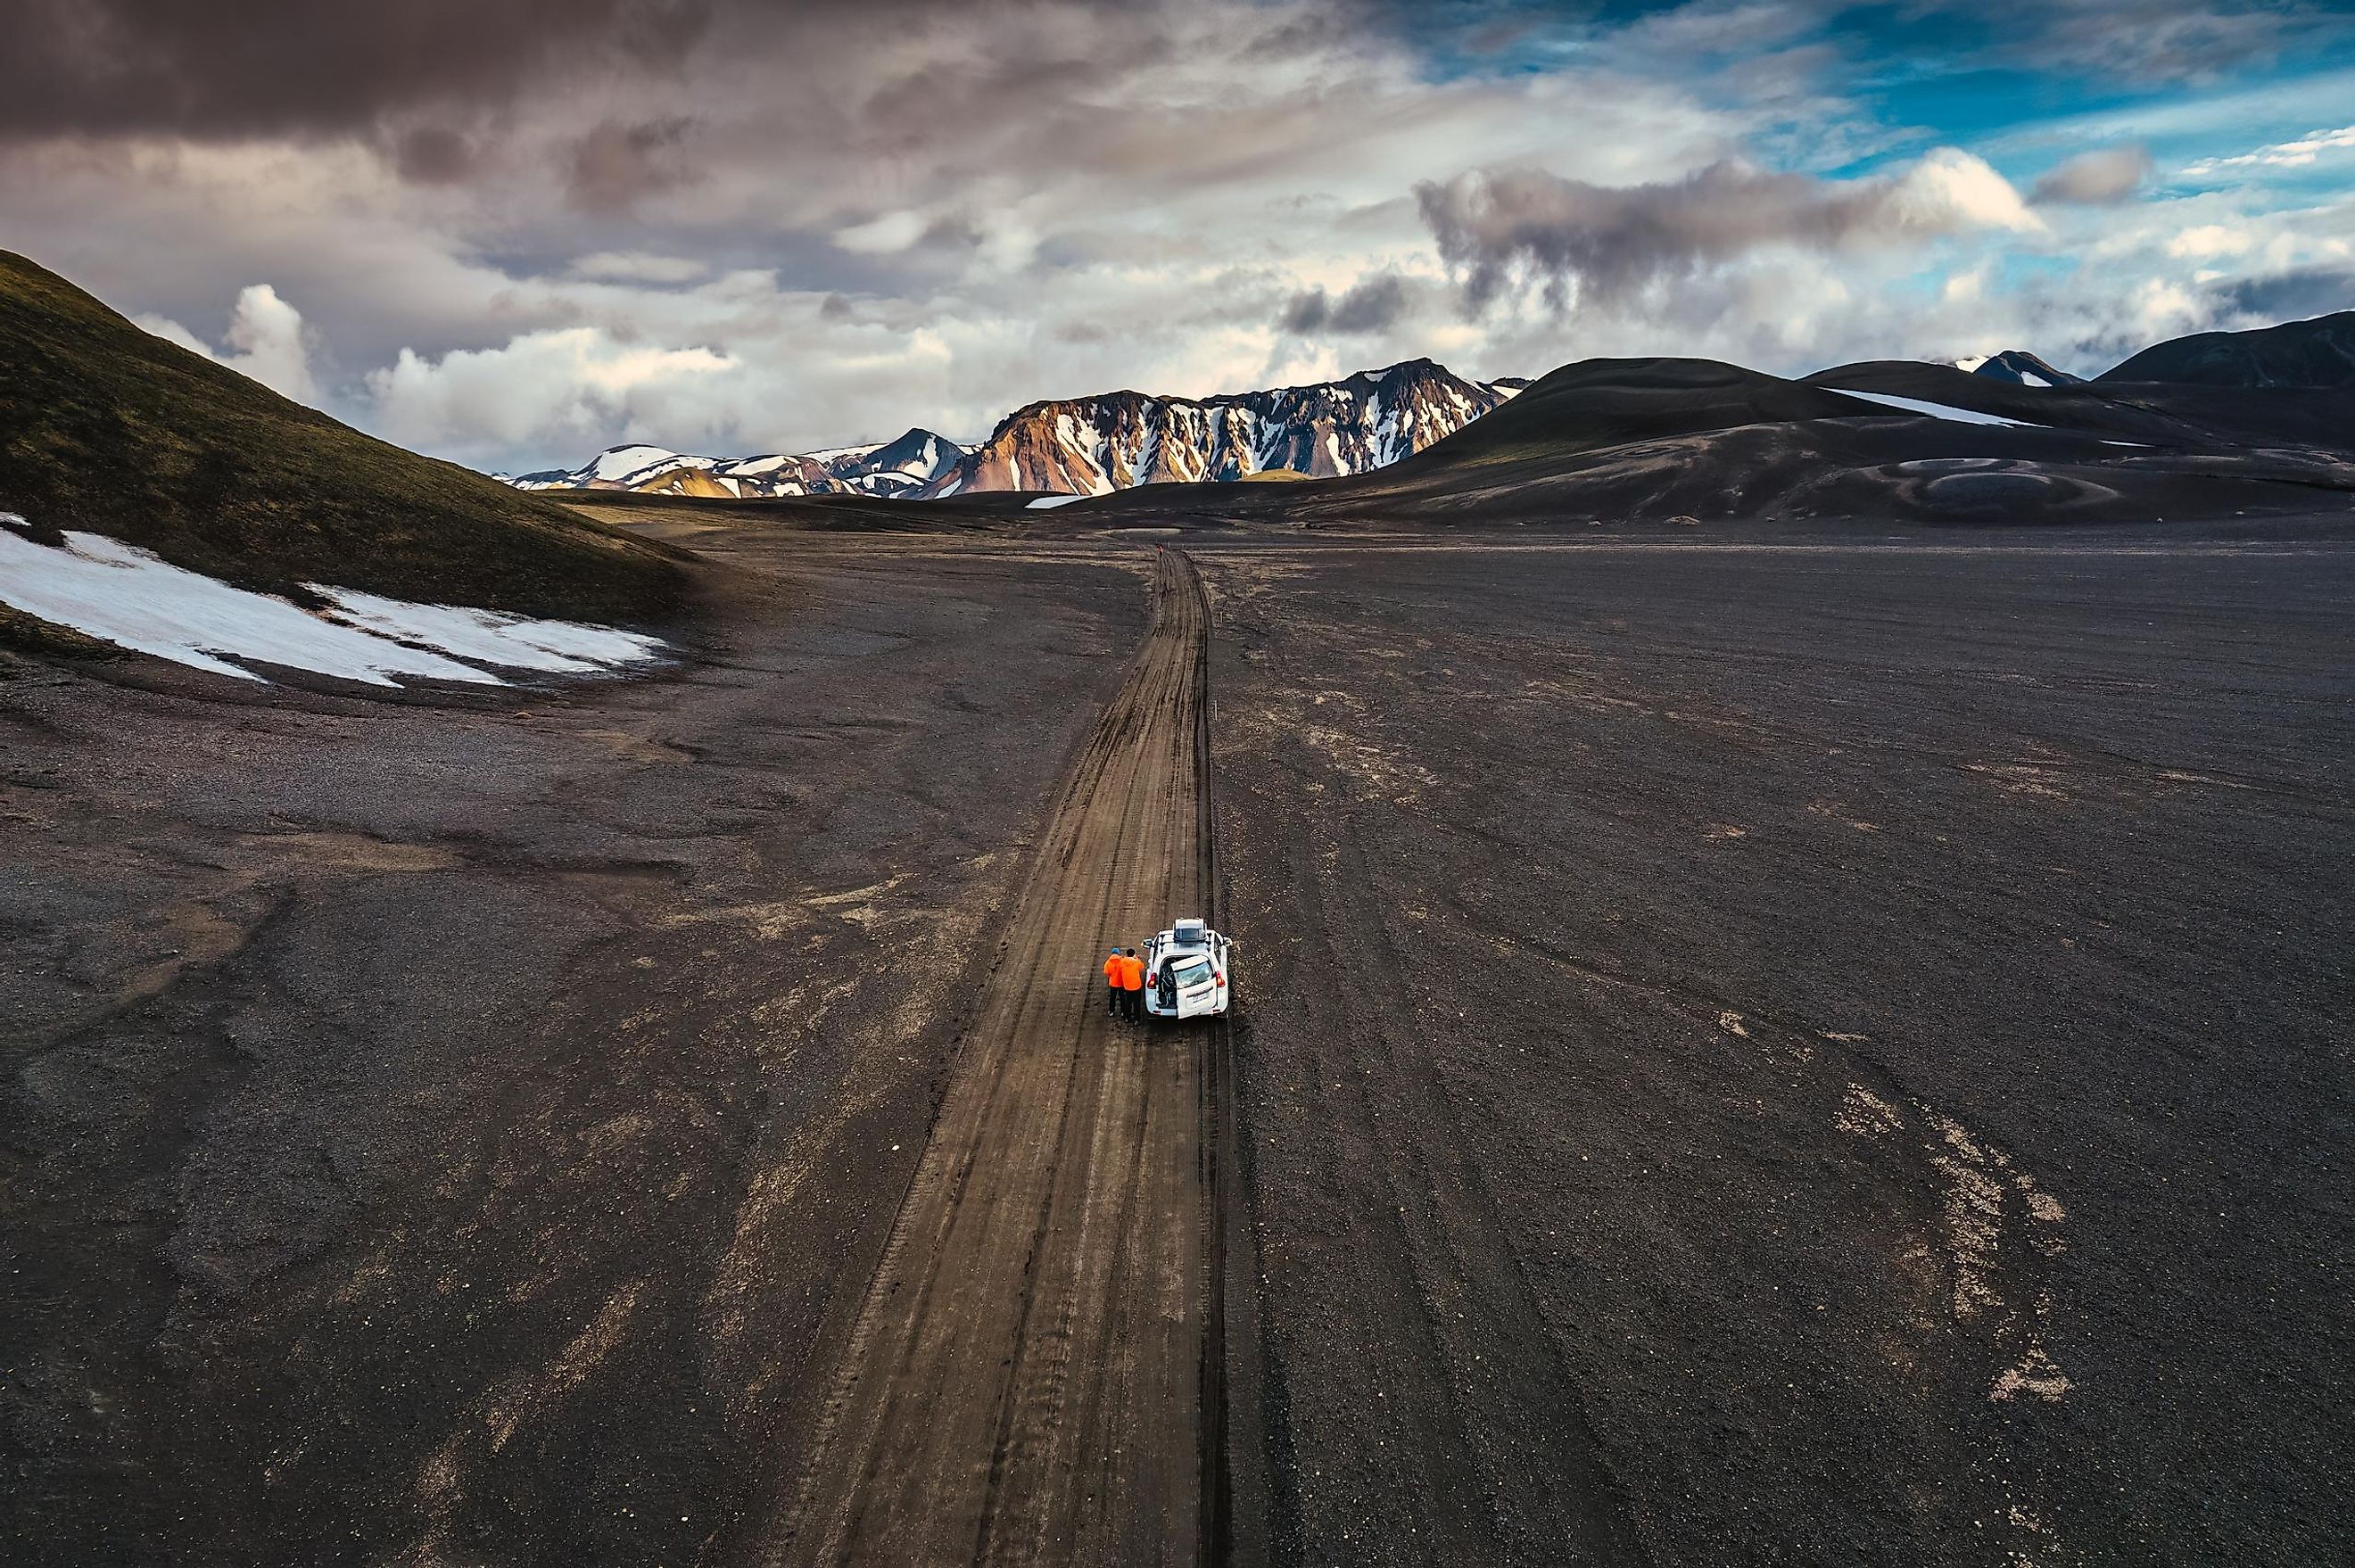 A massive plateau created by lava deposits in the Highland of Iceland.